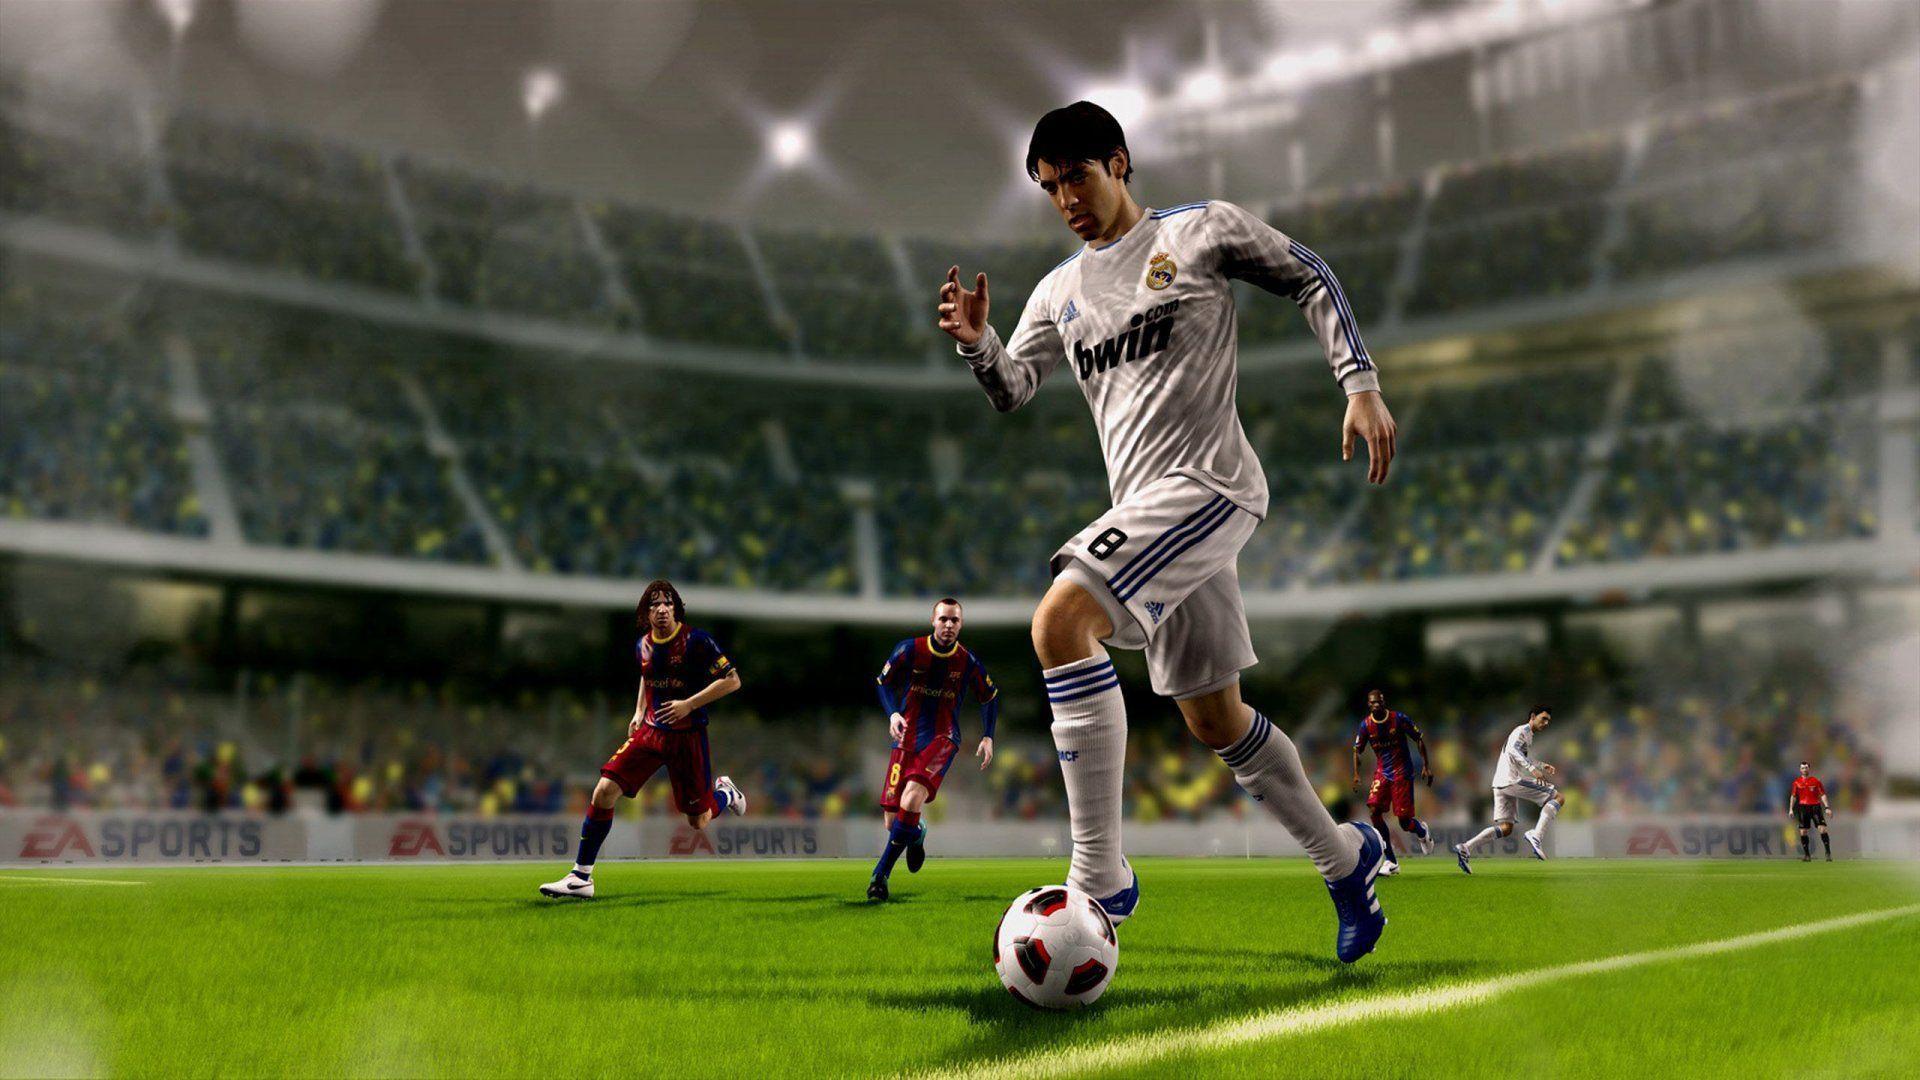 FIFA Game Wallpapers - Wallpaper Cave